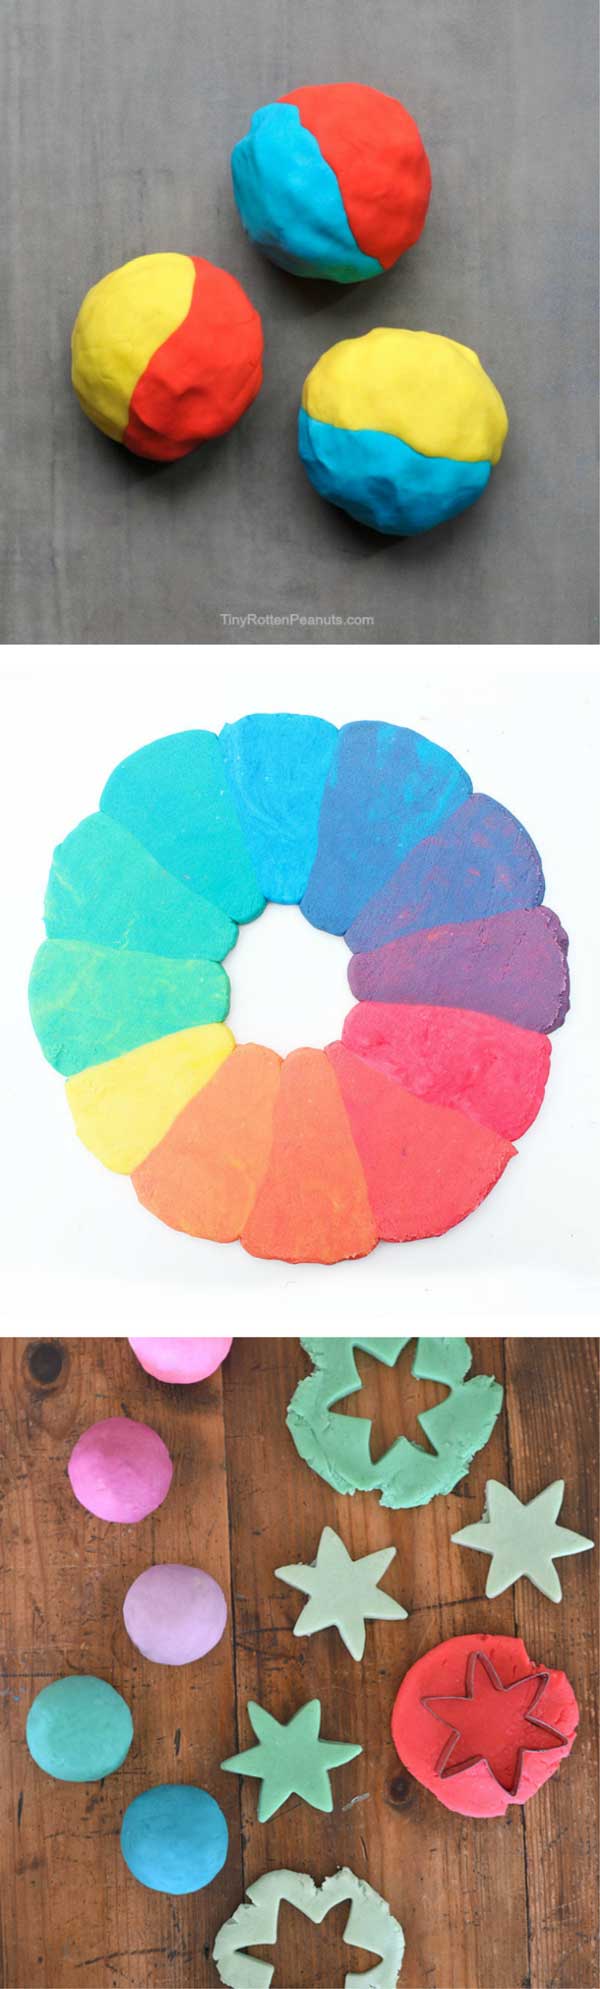 Explore color theory by creating a rainbow playdough color wheel and two other color focused playdough activities.